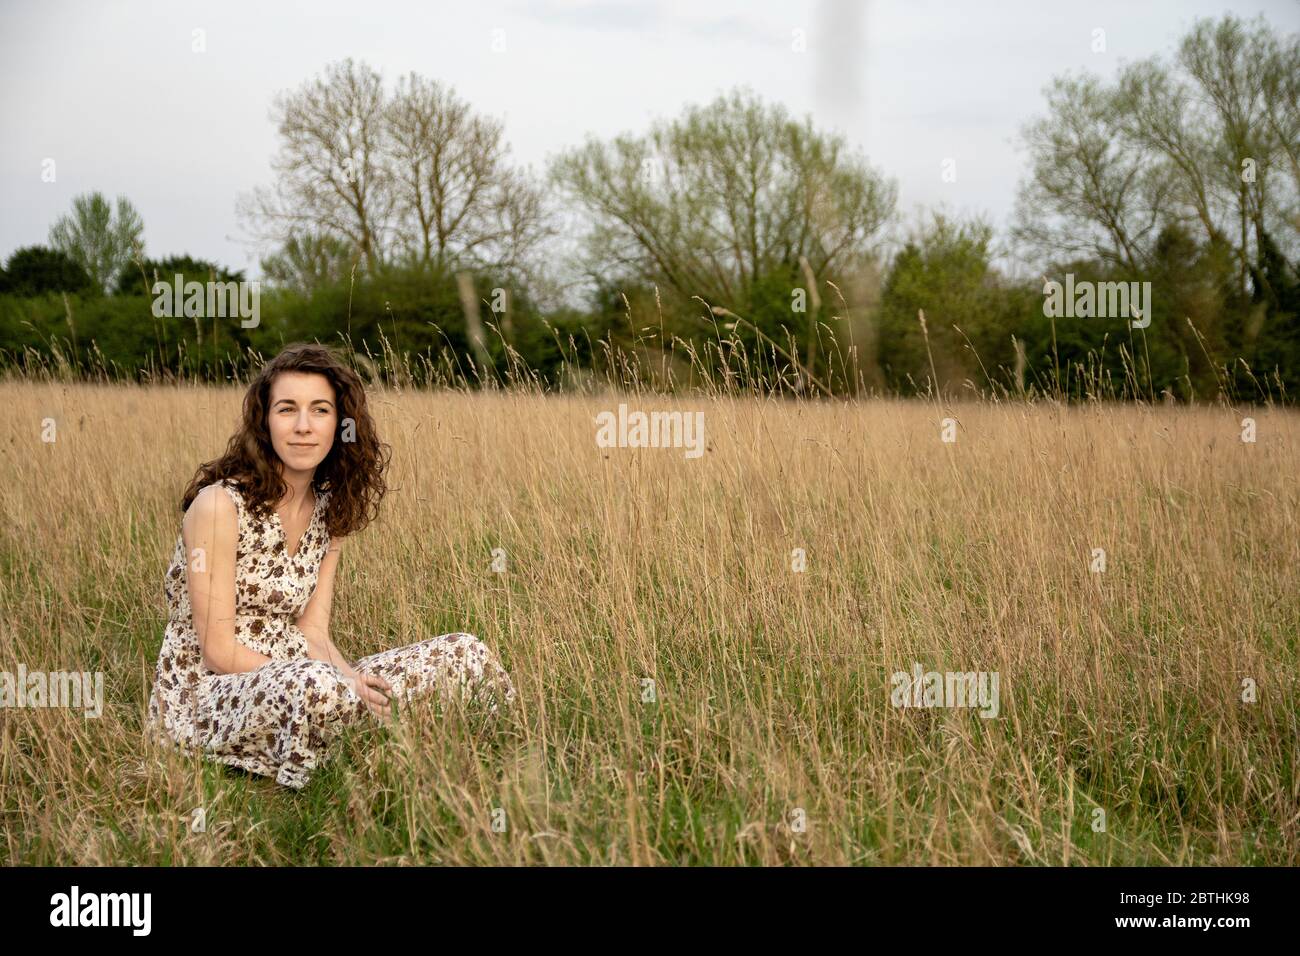 A beautiful and healthy young woman in a dress dances stands peacefully meditating and thinking in a brown grass field at sunset Stock Photo